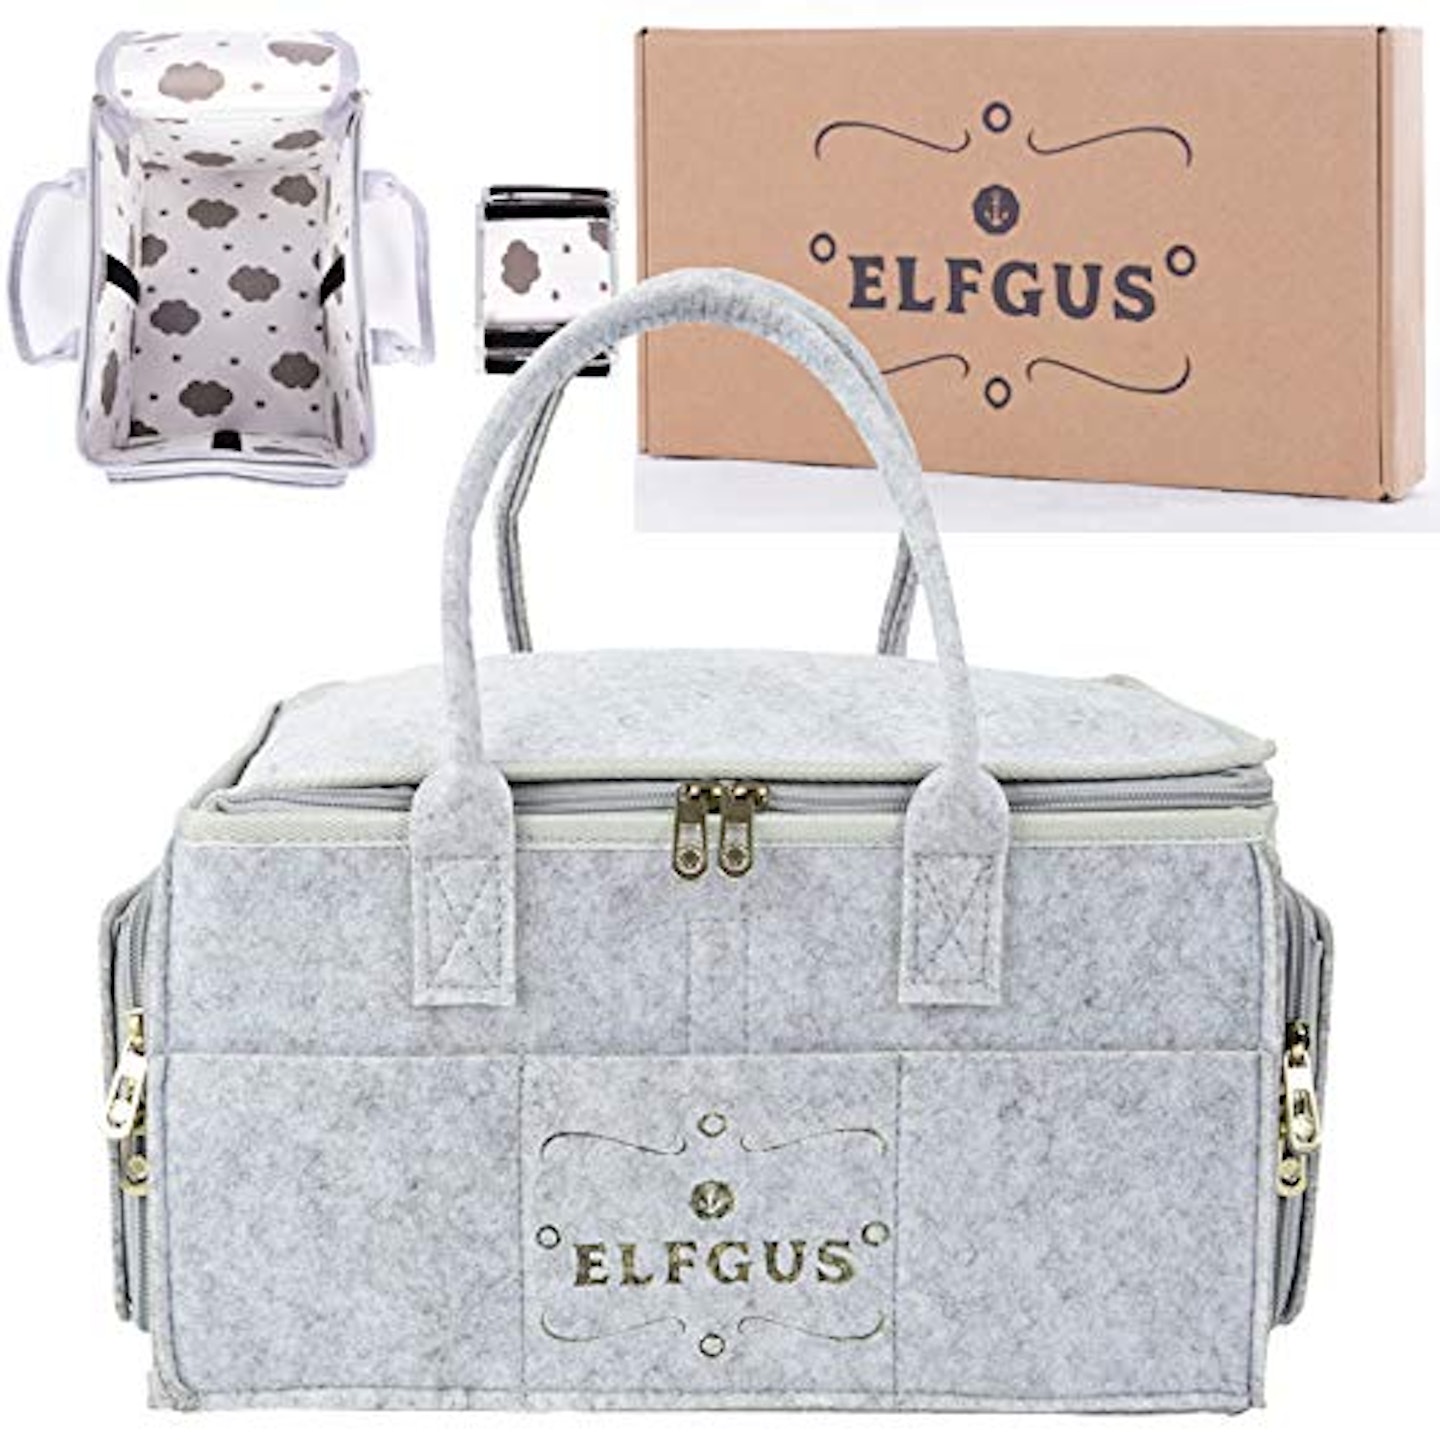 ELFGUS Portable Baby Diaper Caddy - nappy organisers